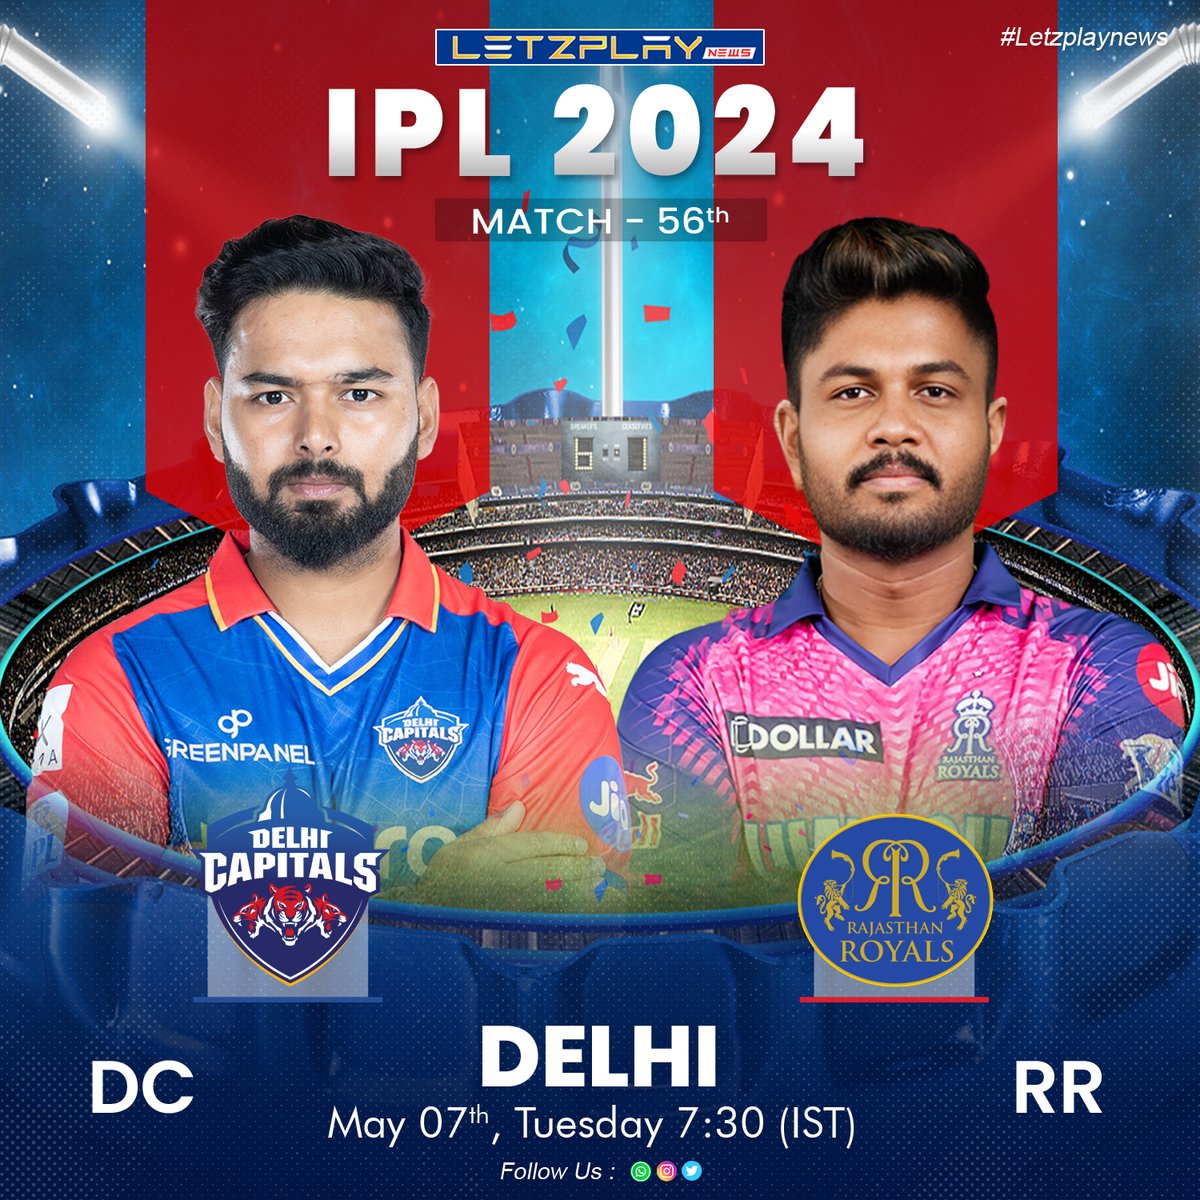 🏏💥 Get ready for an epic showdown as Delhi Capitals take on Rajasthan Royals in the IPL 2024 clash at Delhi on May 7th! 🌟 

Don't miss the action-packed battle! 🔥 
-
-
#DCvsRR #IPL2024 #iplupdate #news #NewsUpdate #DelhiCapitals #RajasthanRoyals #CricketFever #MatchDayMadness